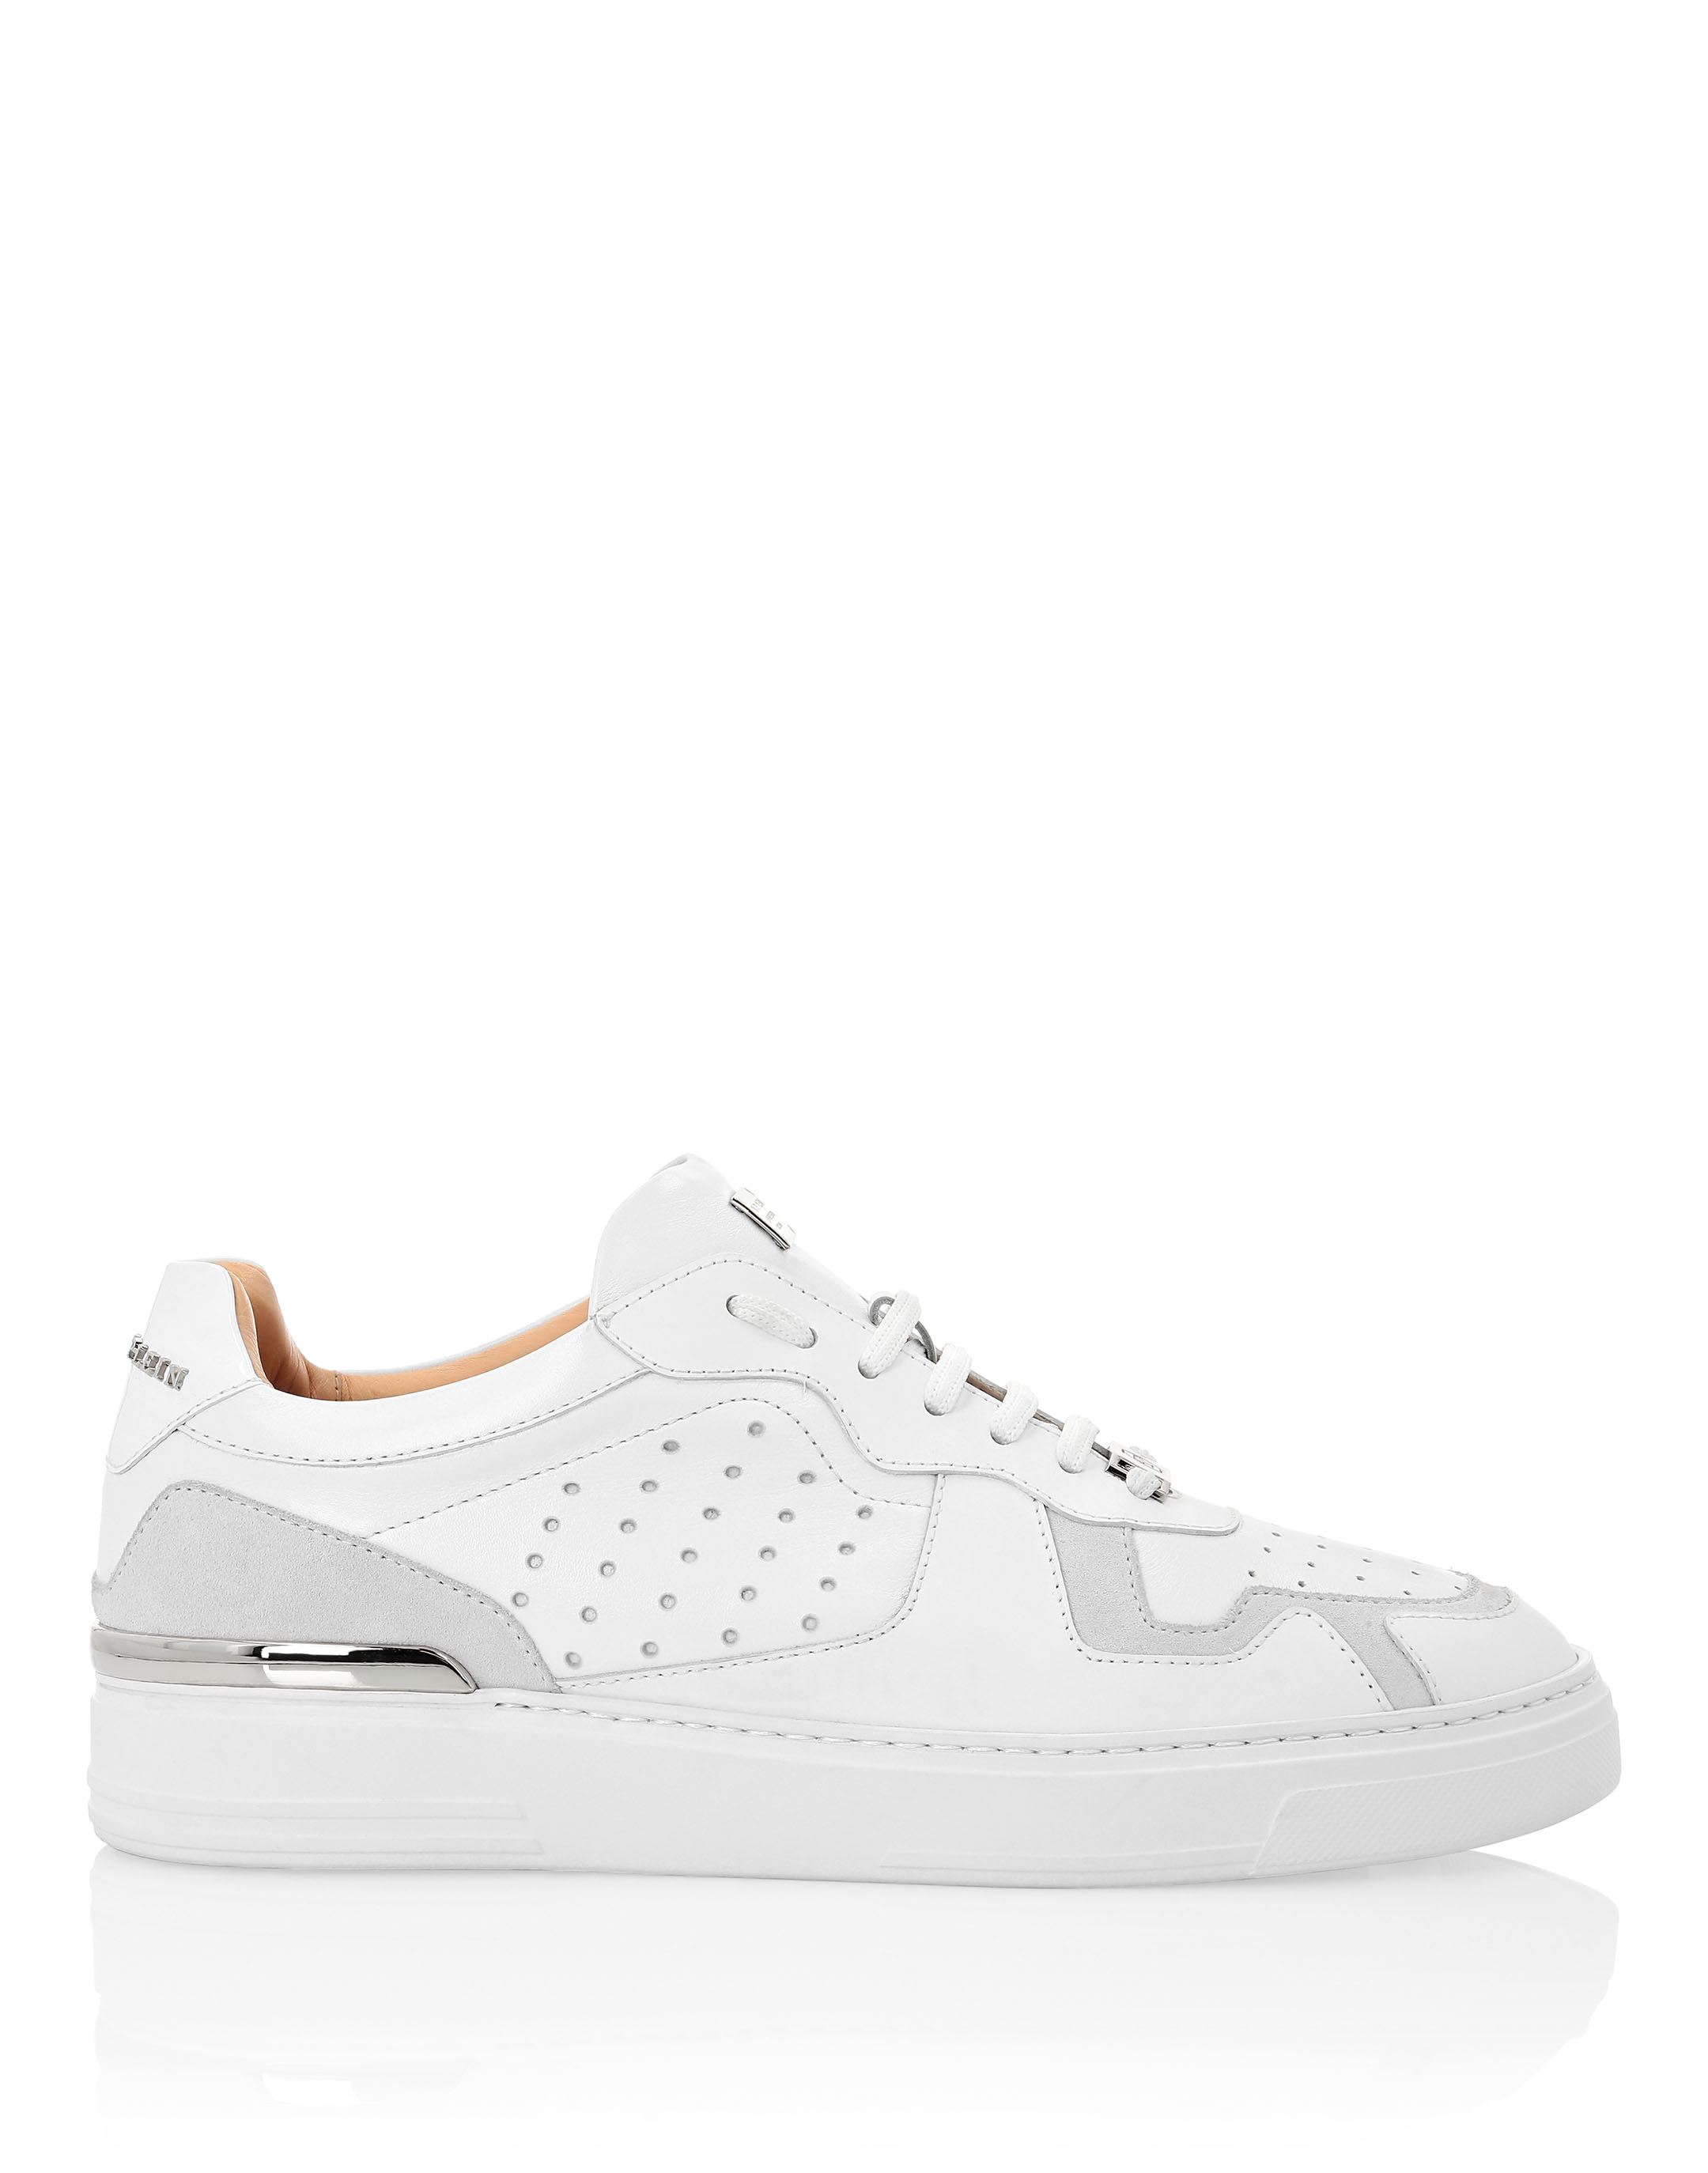 Lo-Top Sneakers mix leathers G.O.A.T. TM | Philipp Plein Outlet